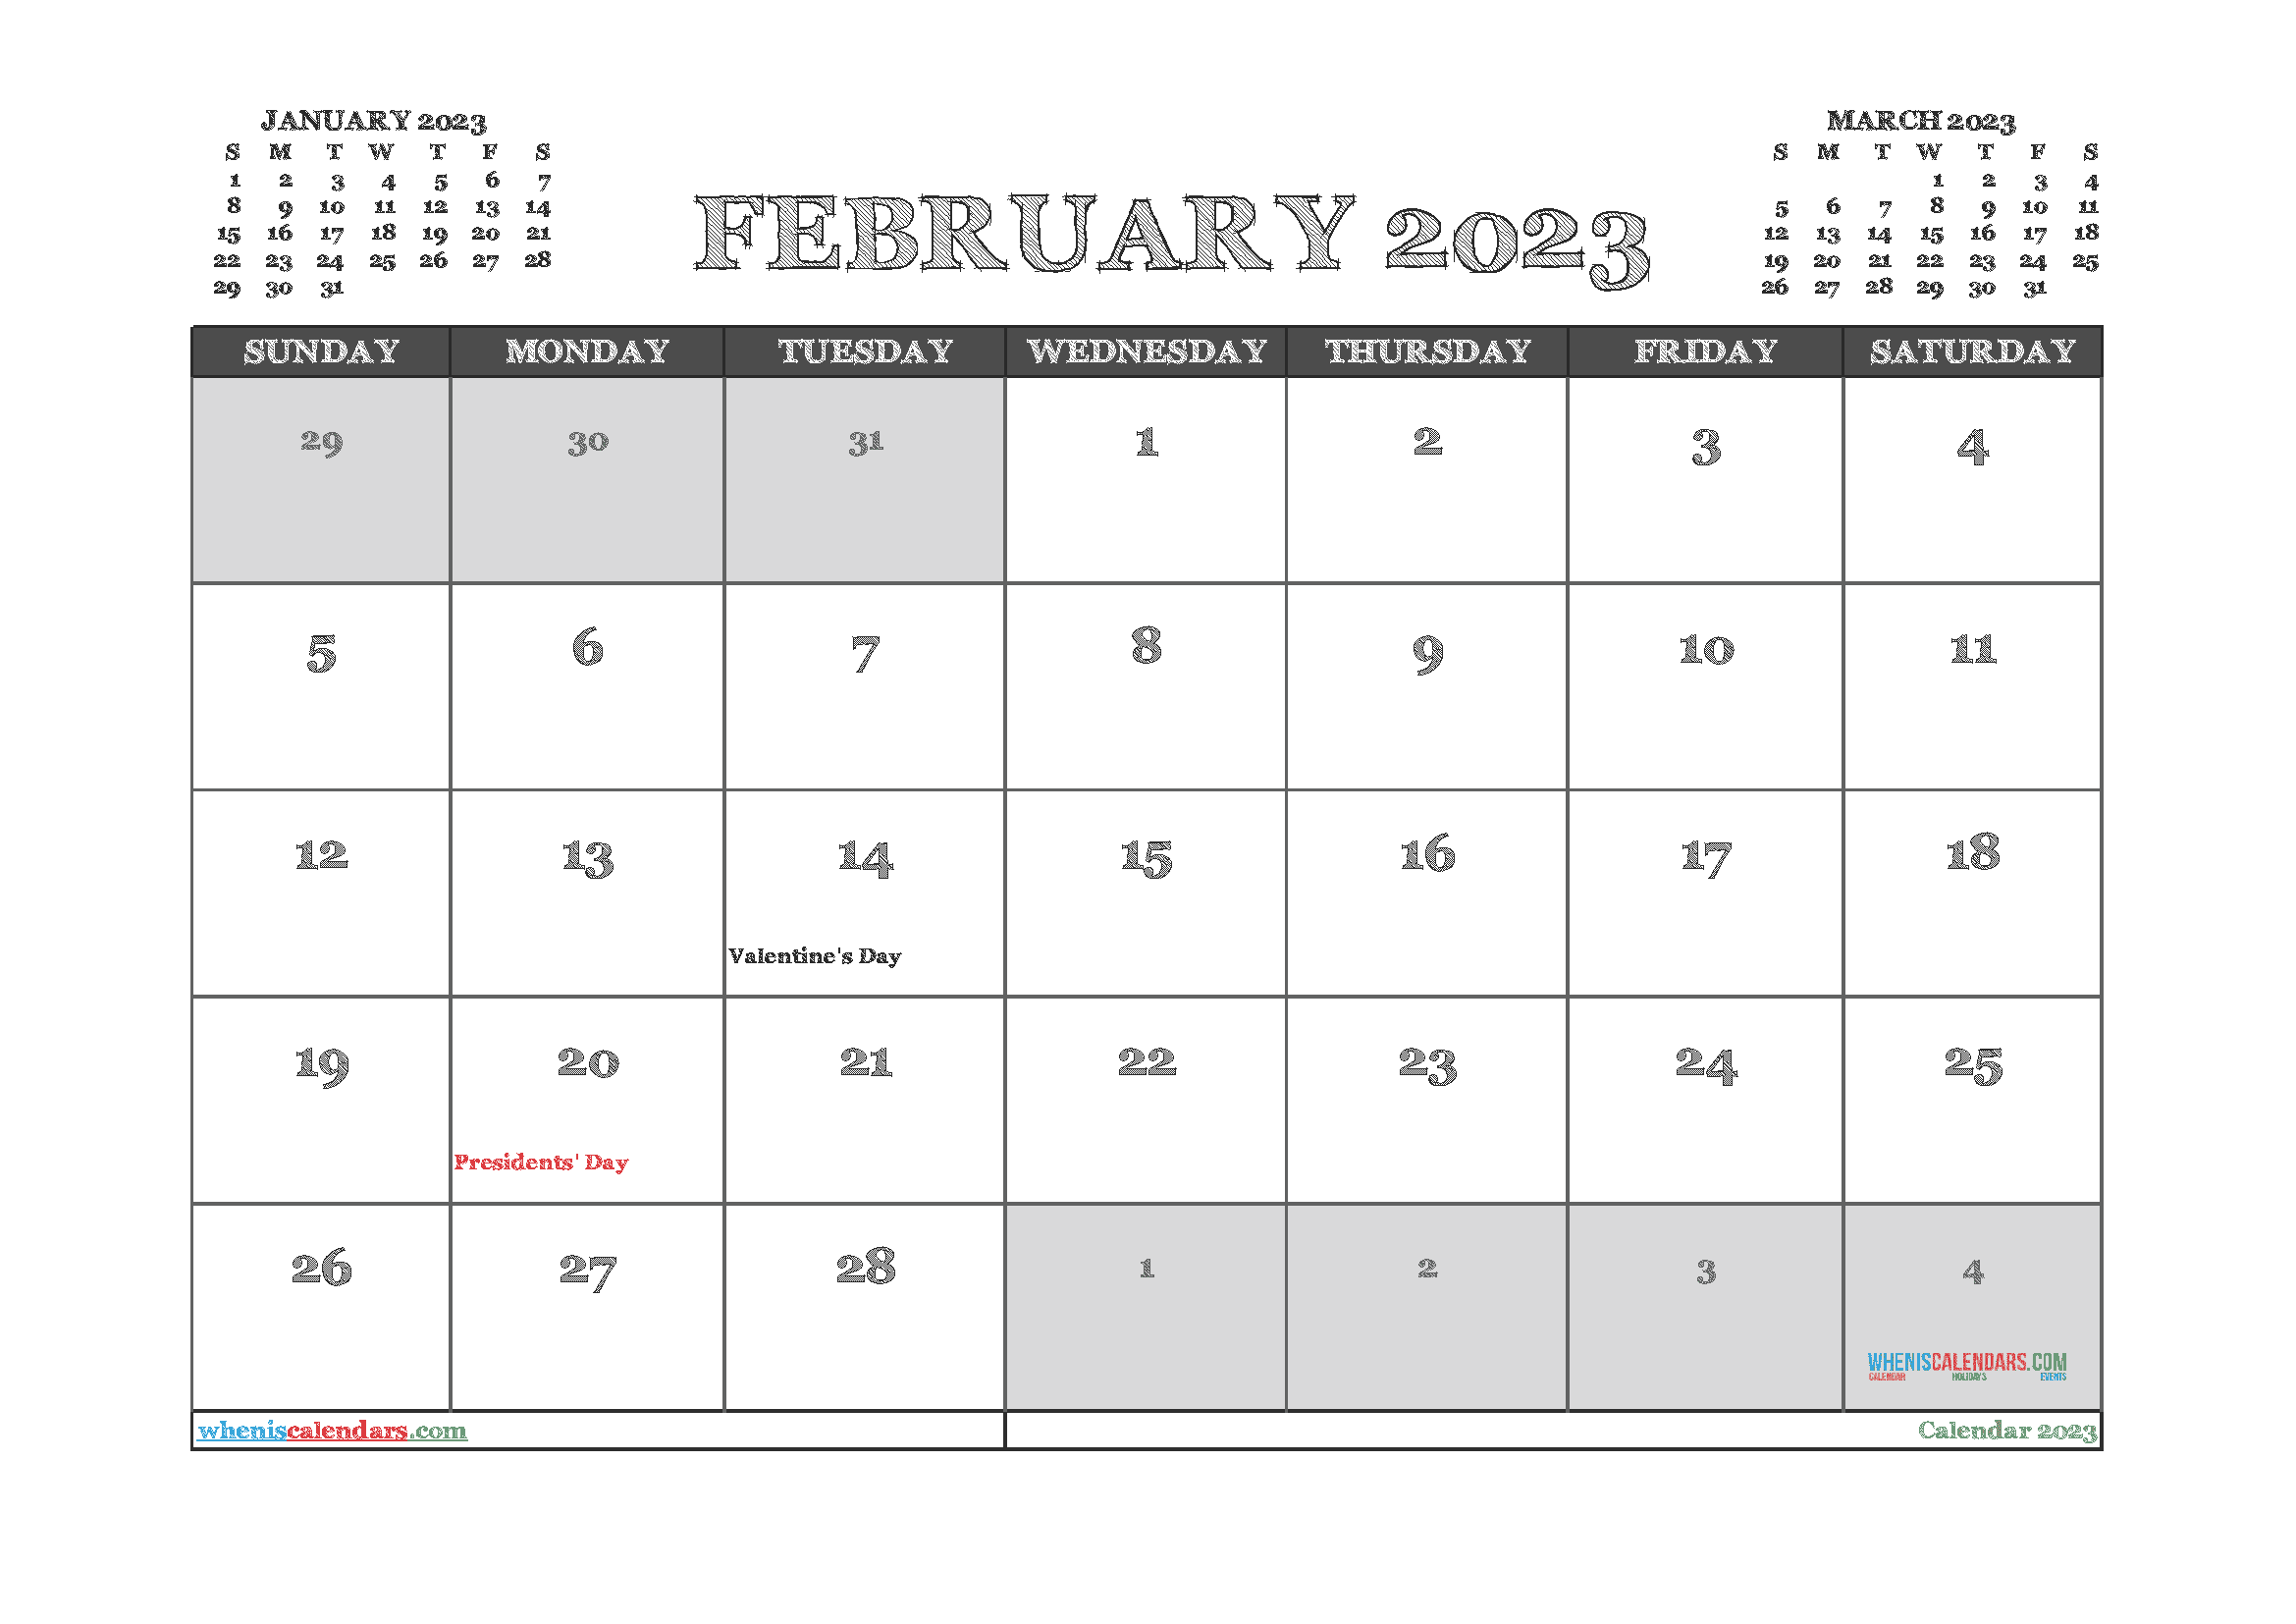 Free Printable Calendar February 2023 with Holidays PDF in Landscape